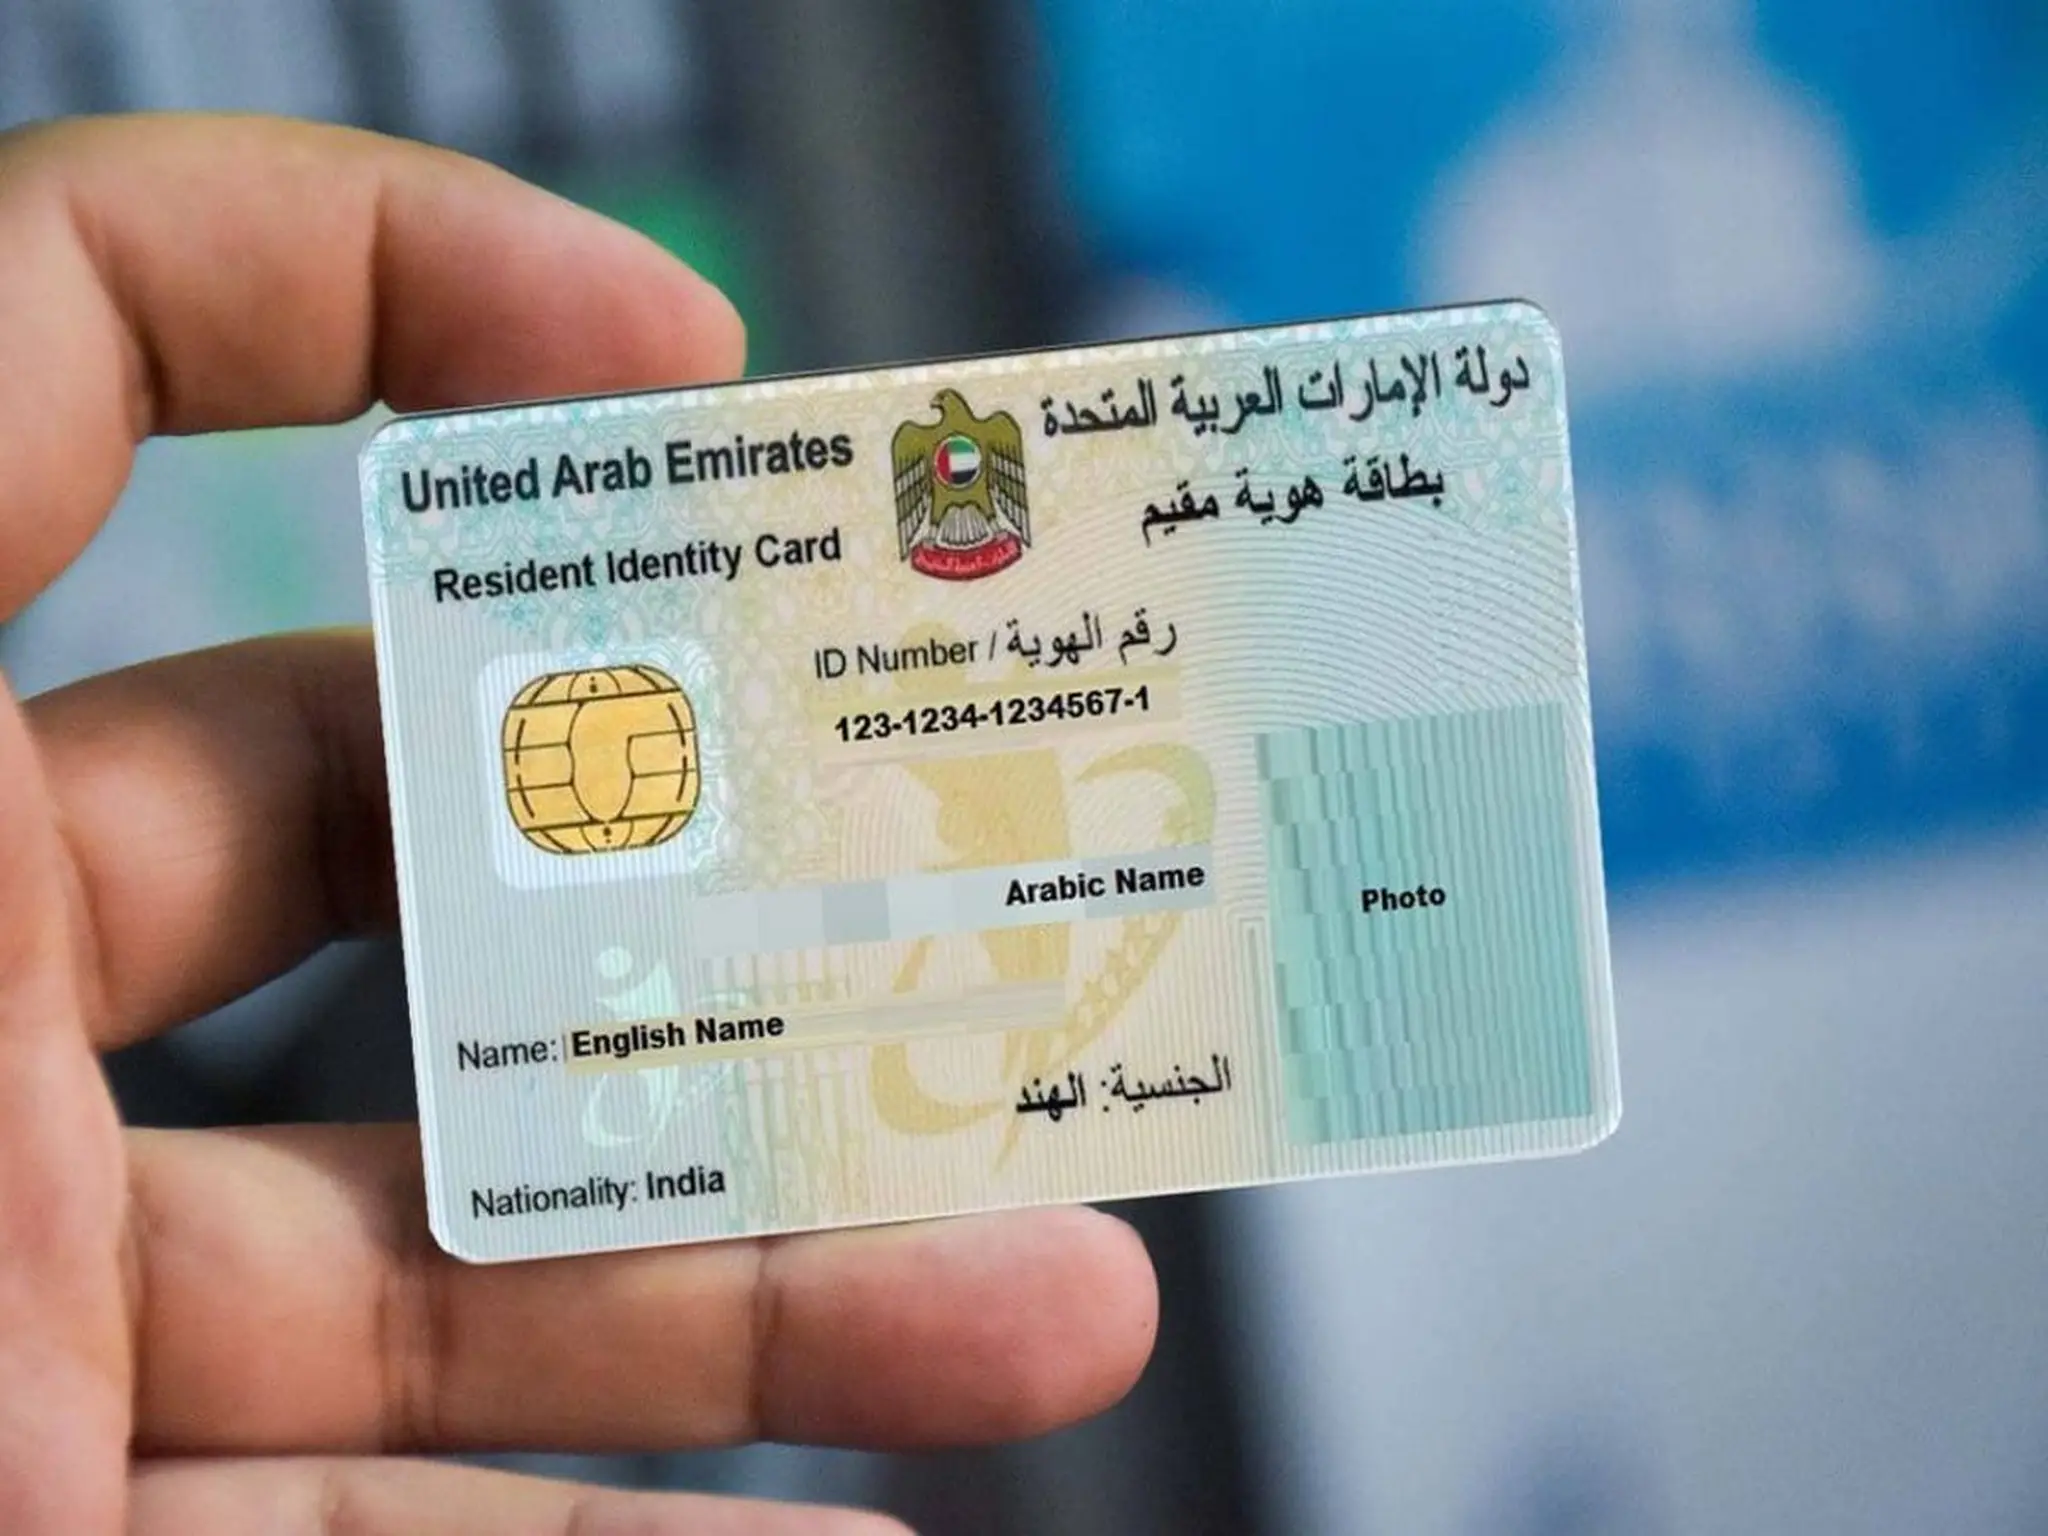 Dubai Courts calls residents to update Emirates ID details